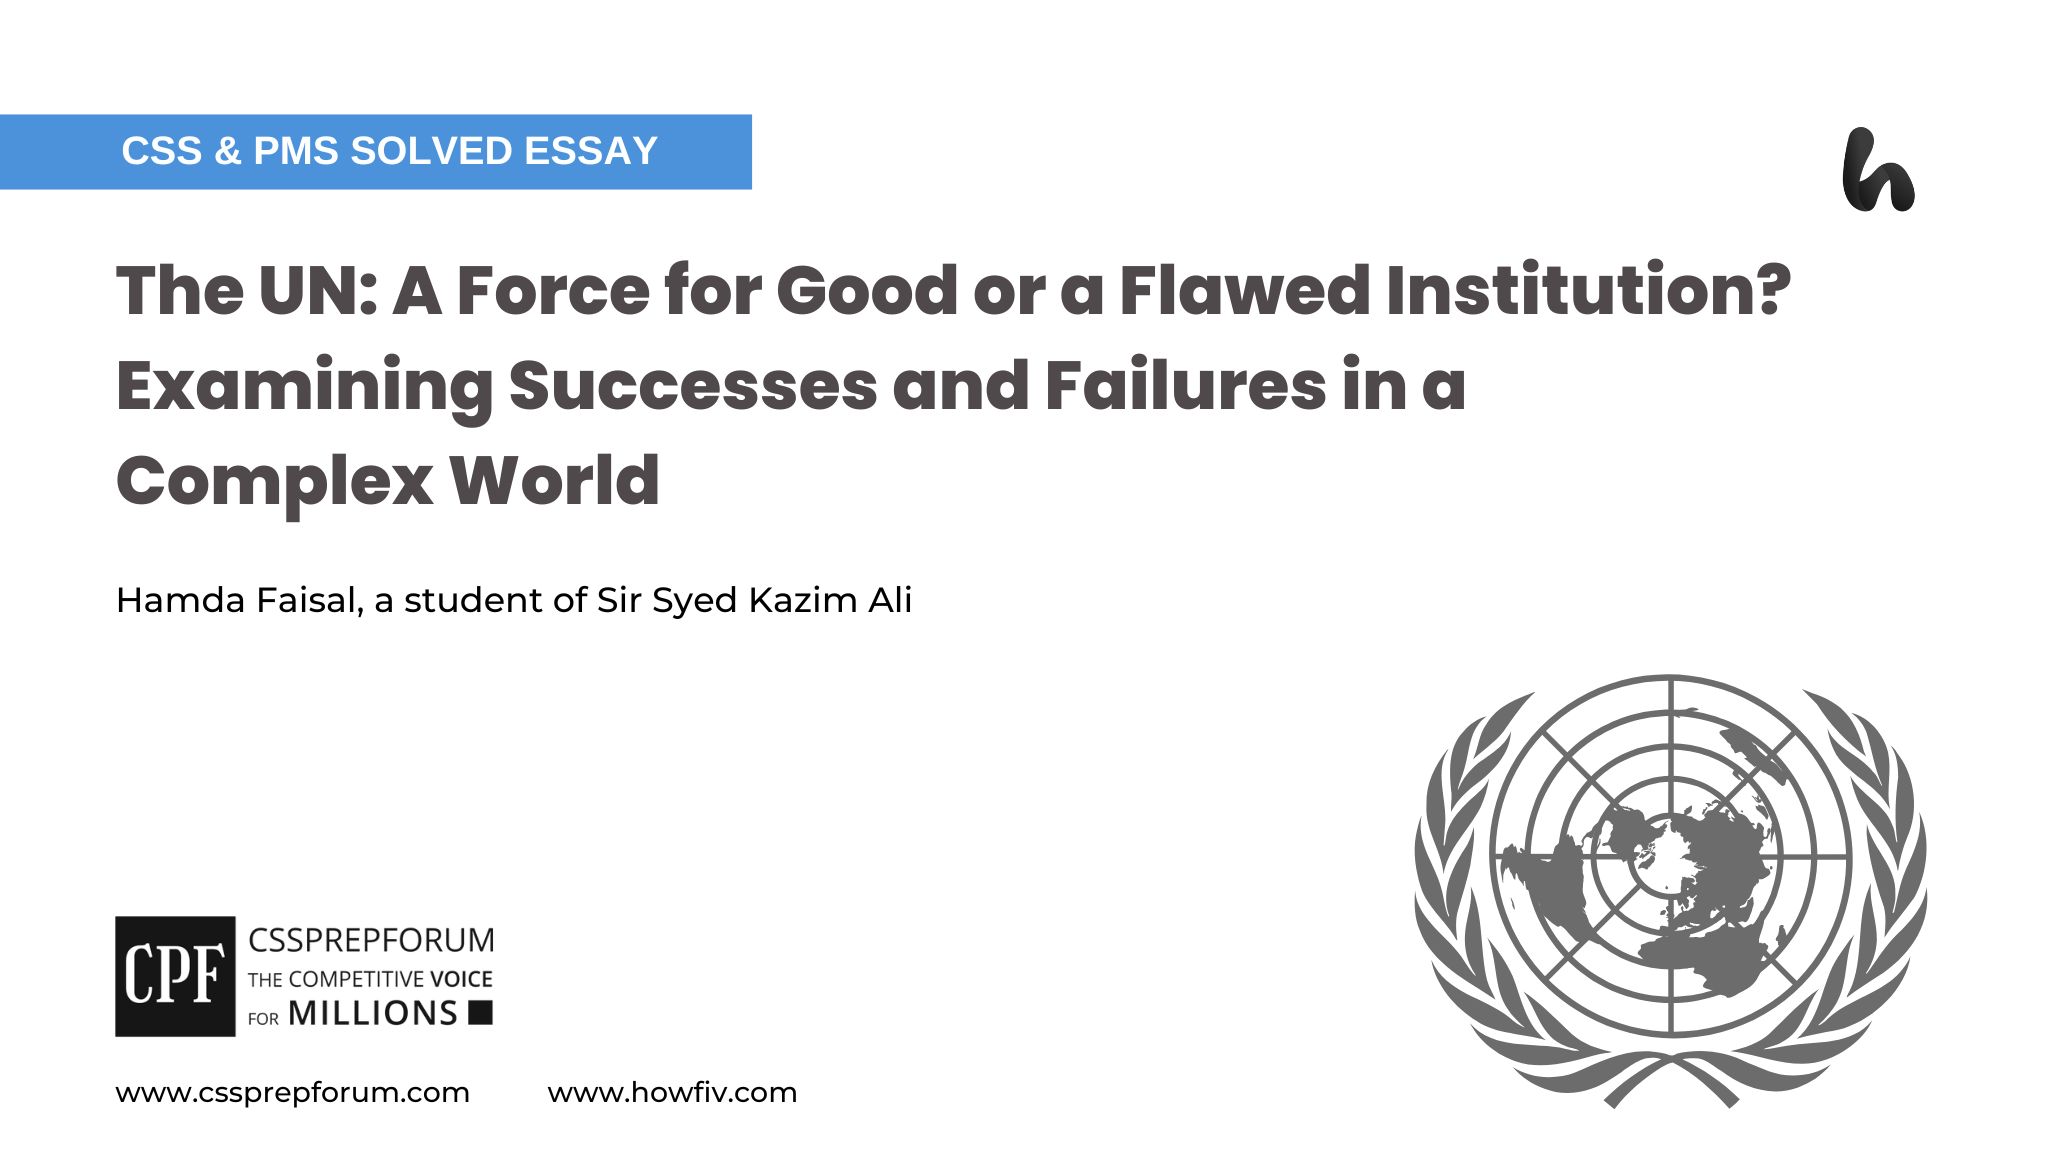 The UN: A Force for Good or a Flawed Institution by Hamda Faisal